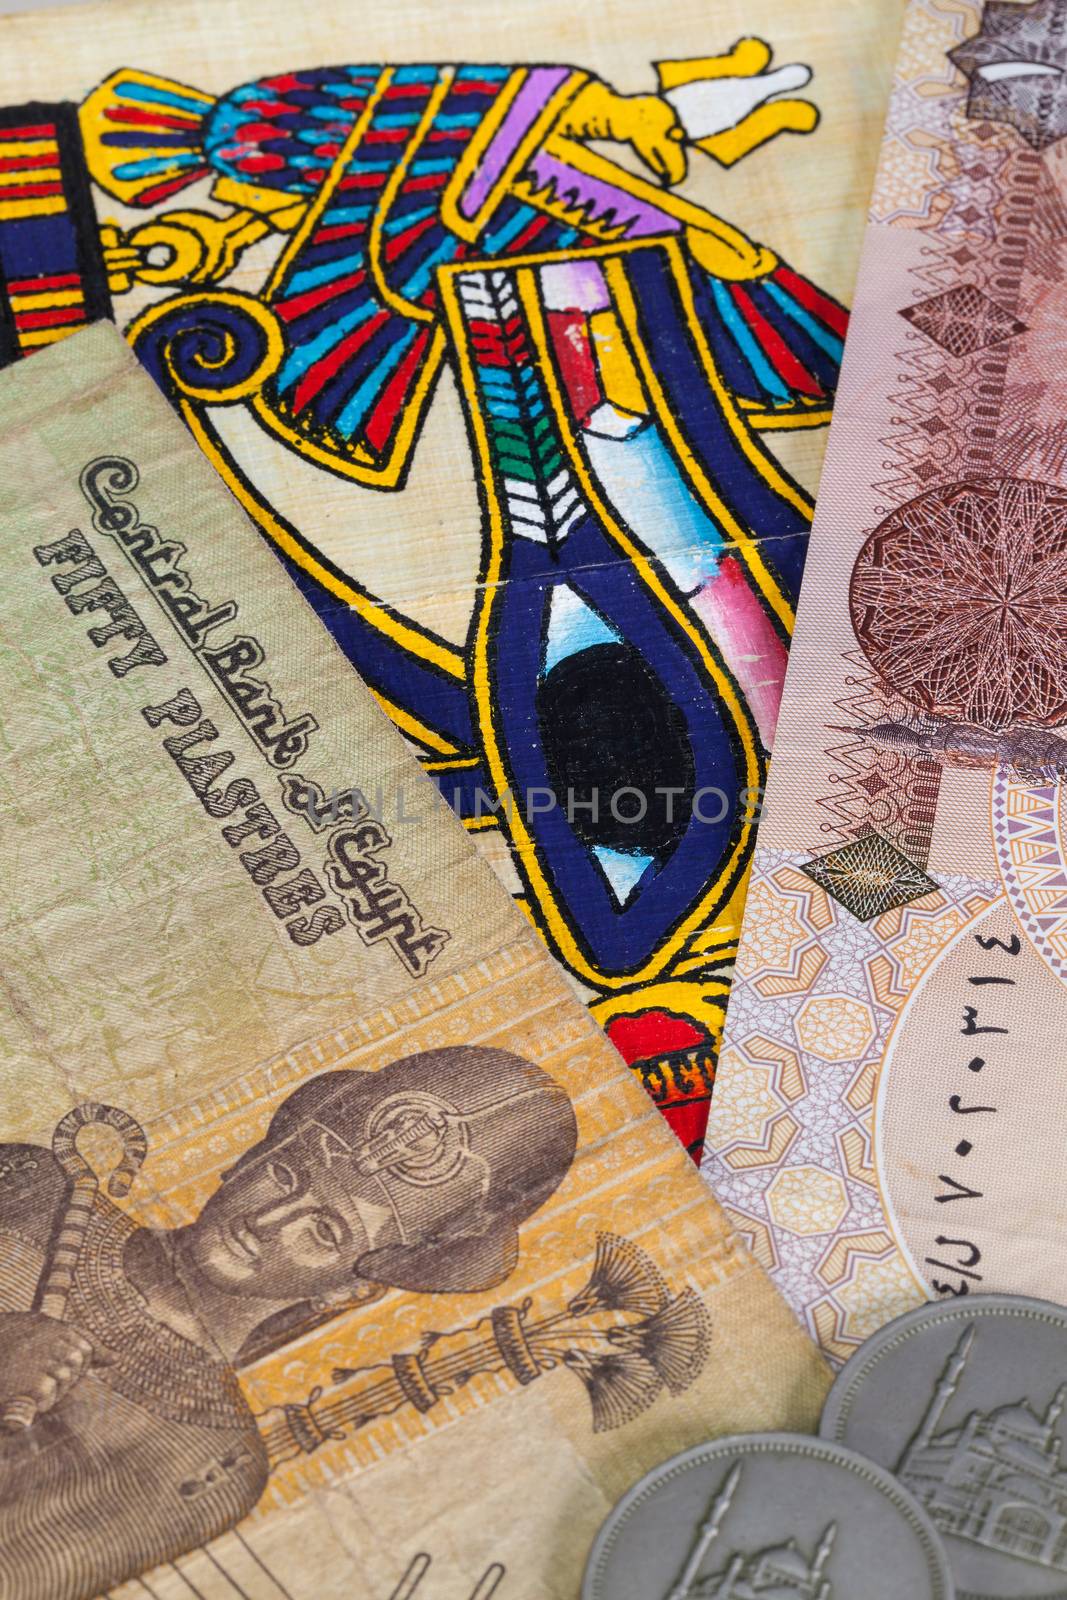 Typical Egyptian hieroglyphics on papyrus and different banknotes